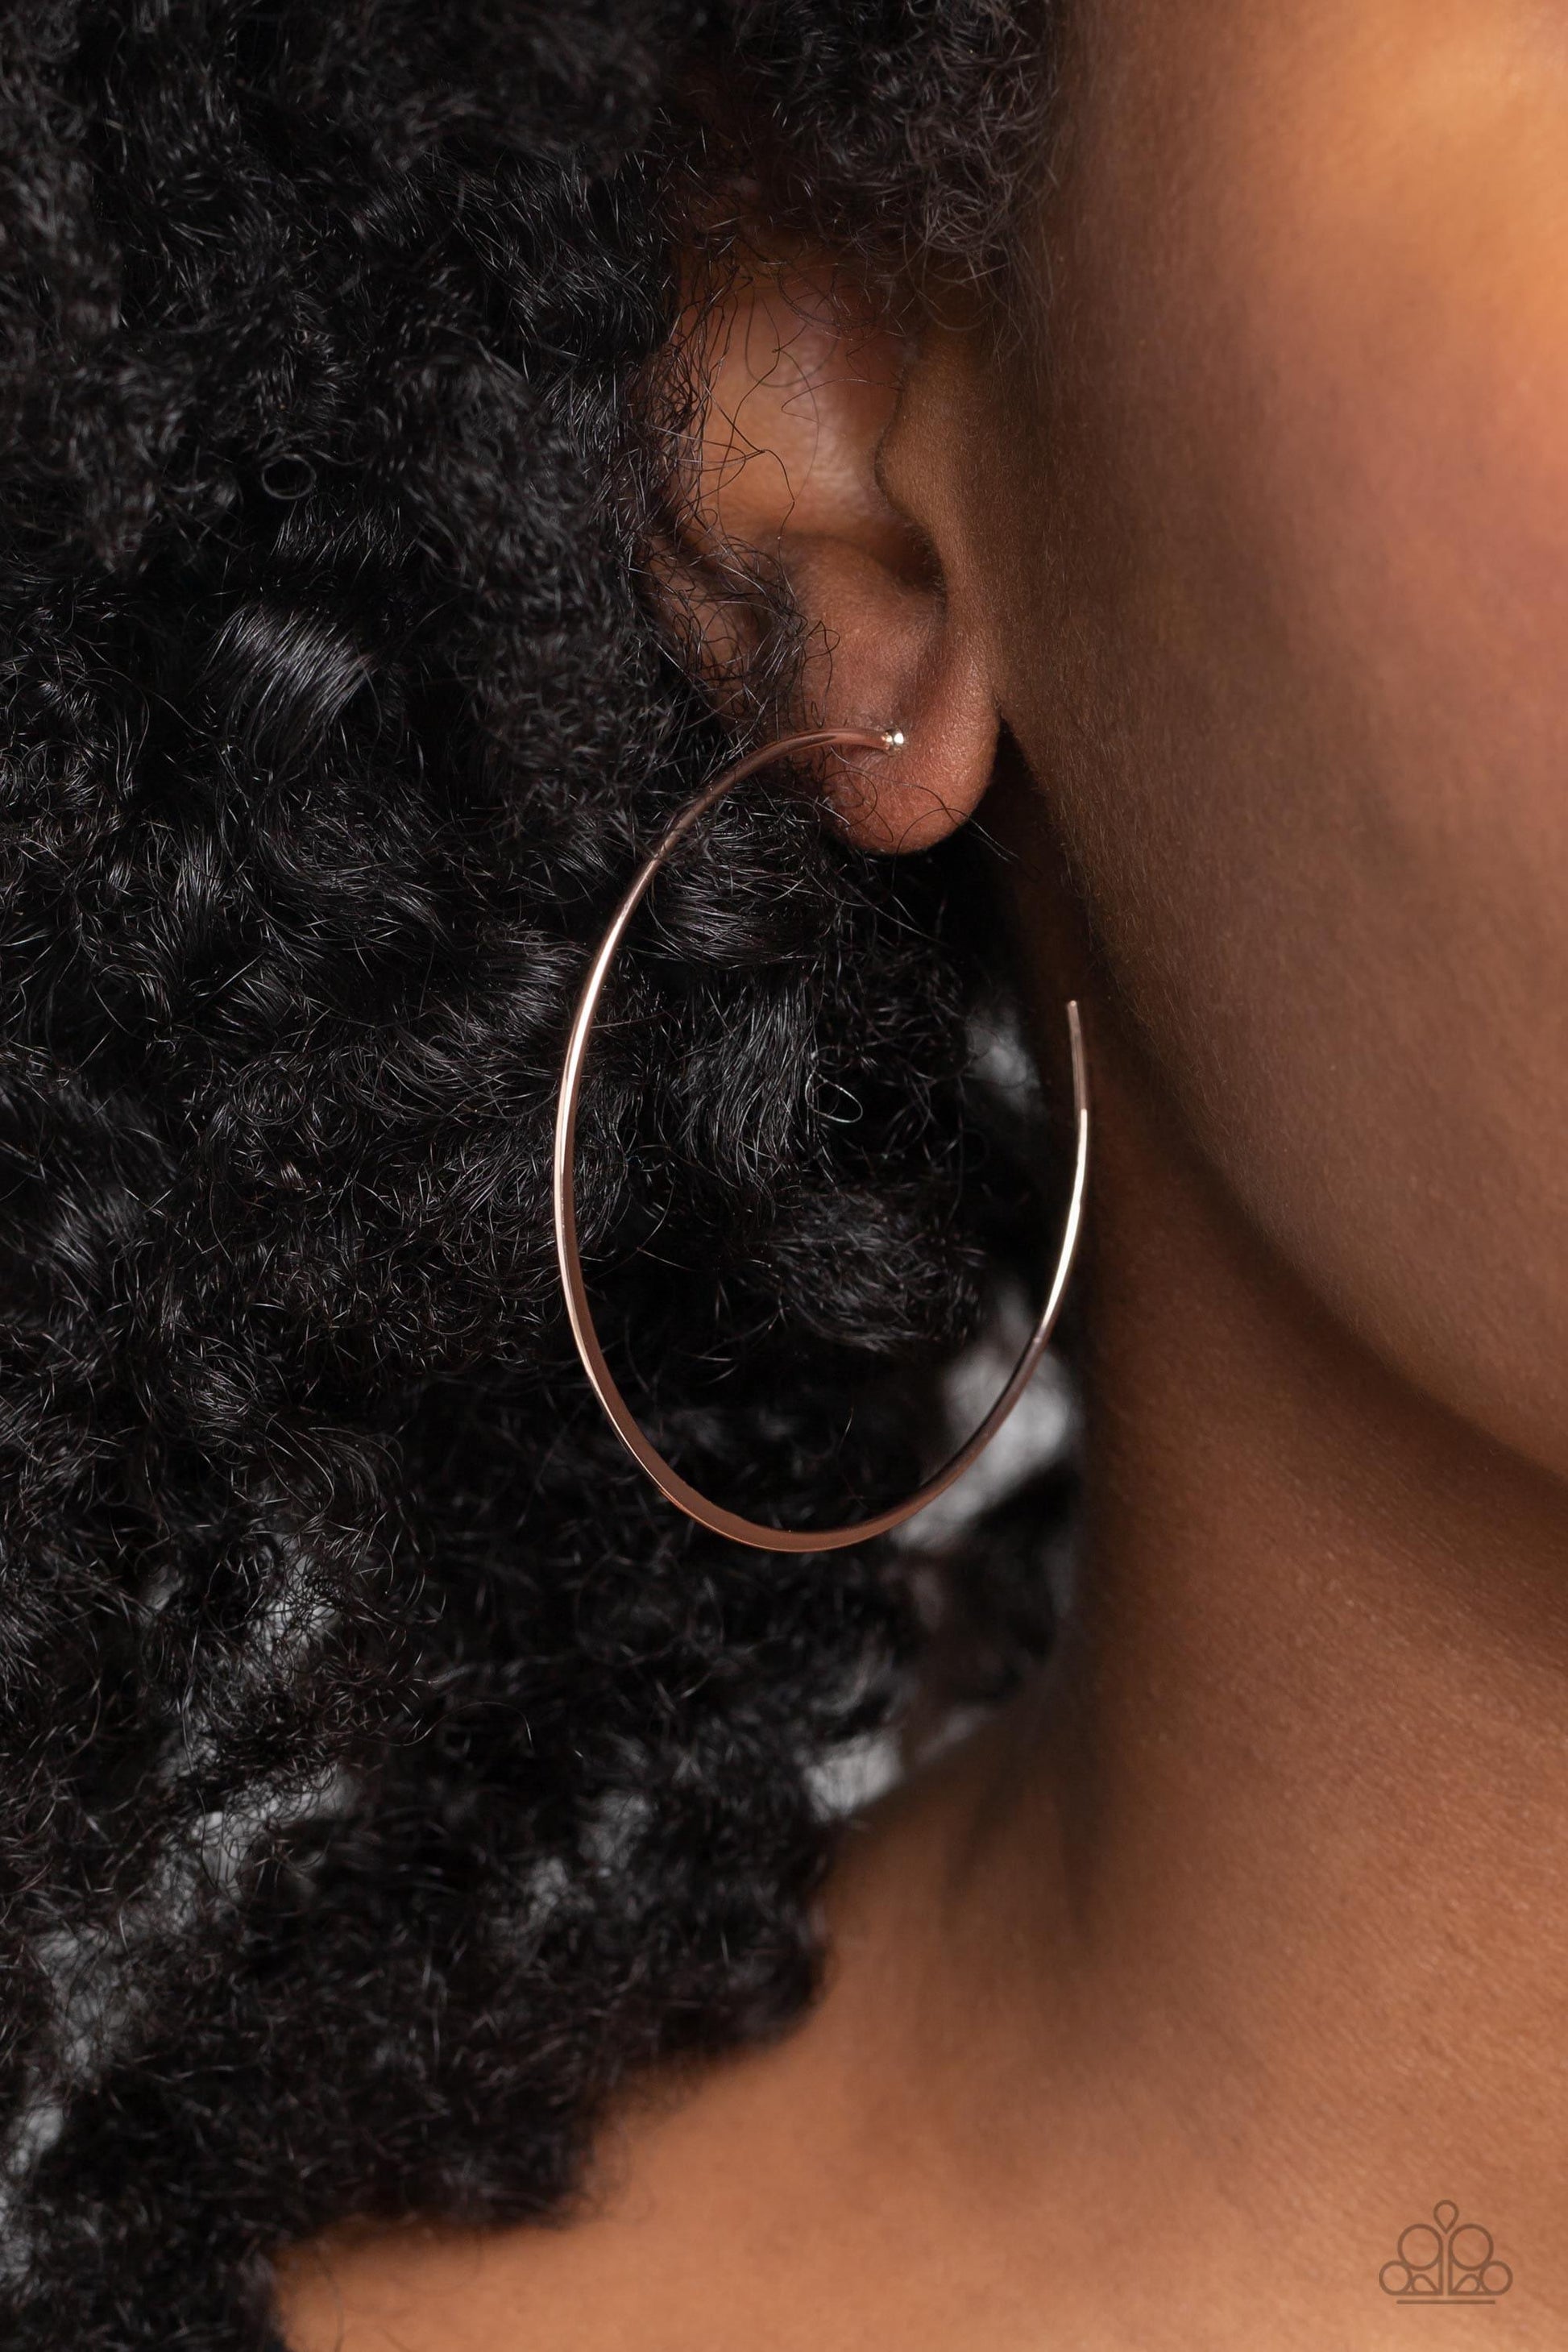 Paparazzi Accessories - Seize The Sheen - Rose Gold Hoop Earrings - Bling by JessieK